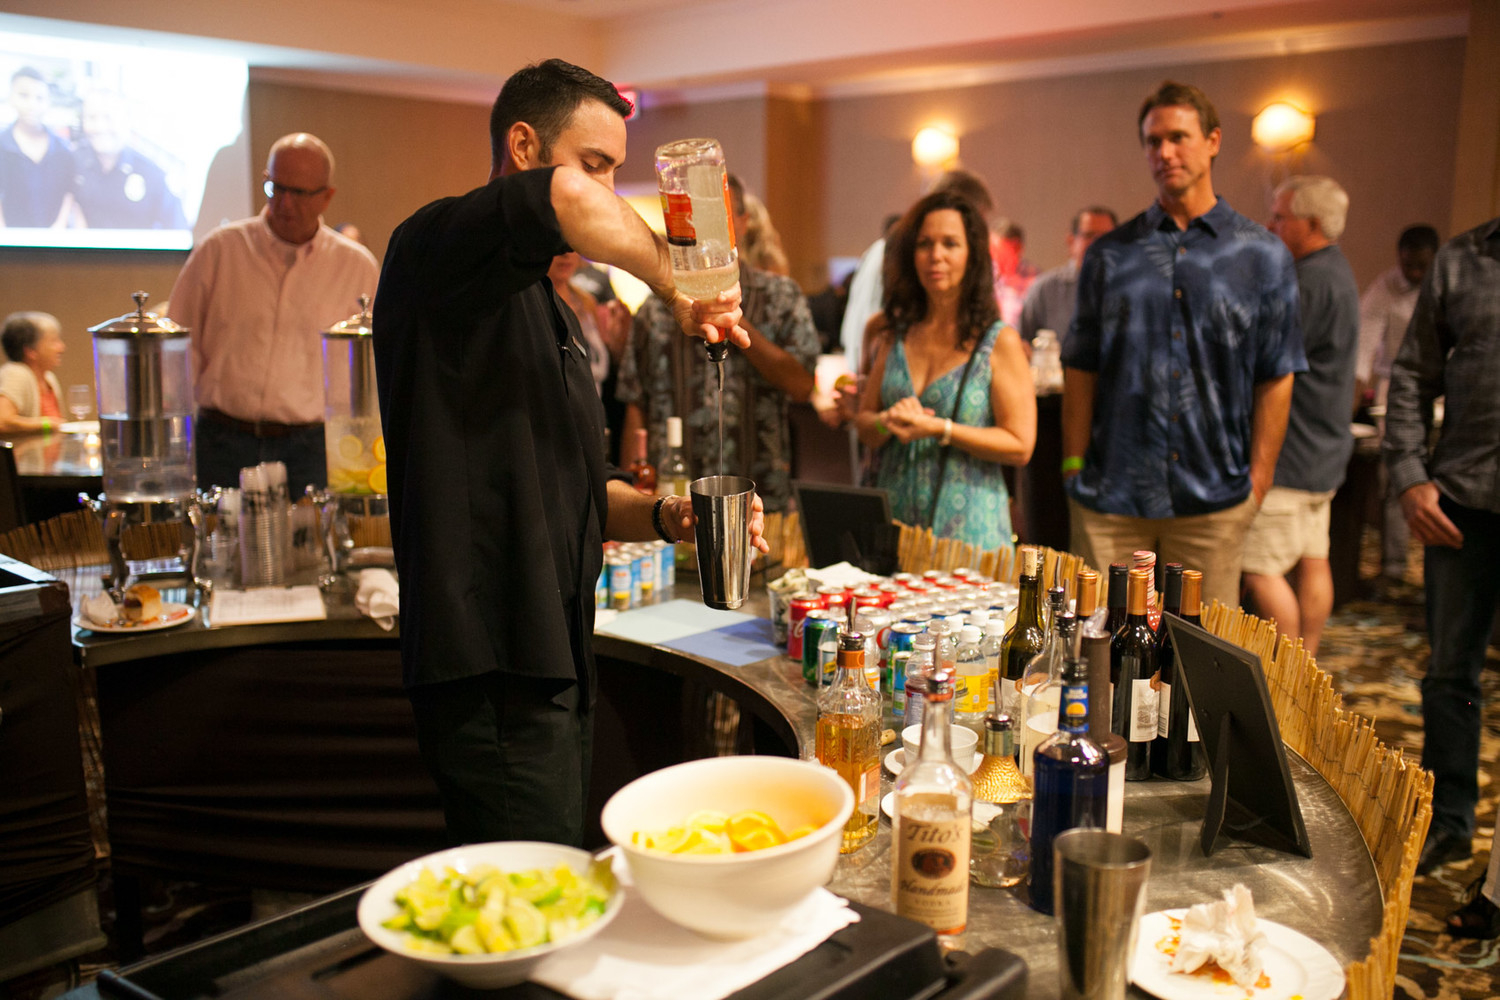 A bartender serves up one of the event's signature drinks.